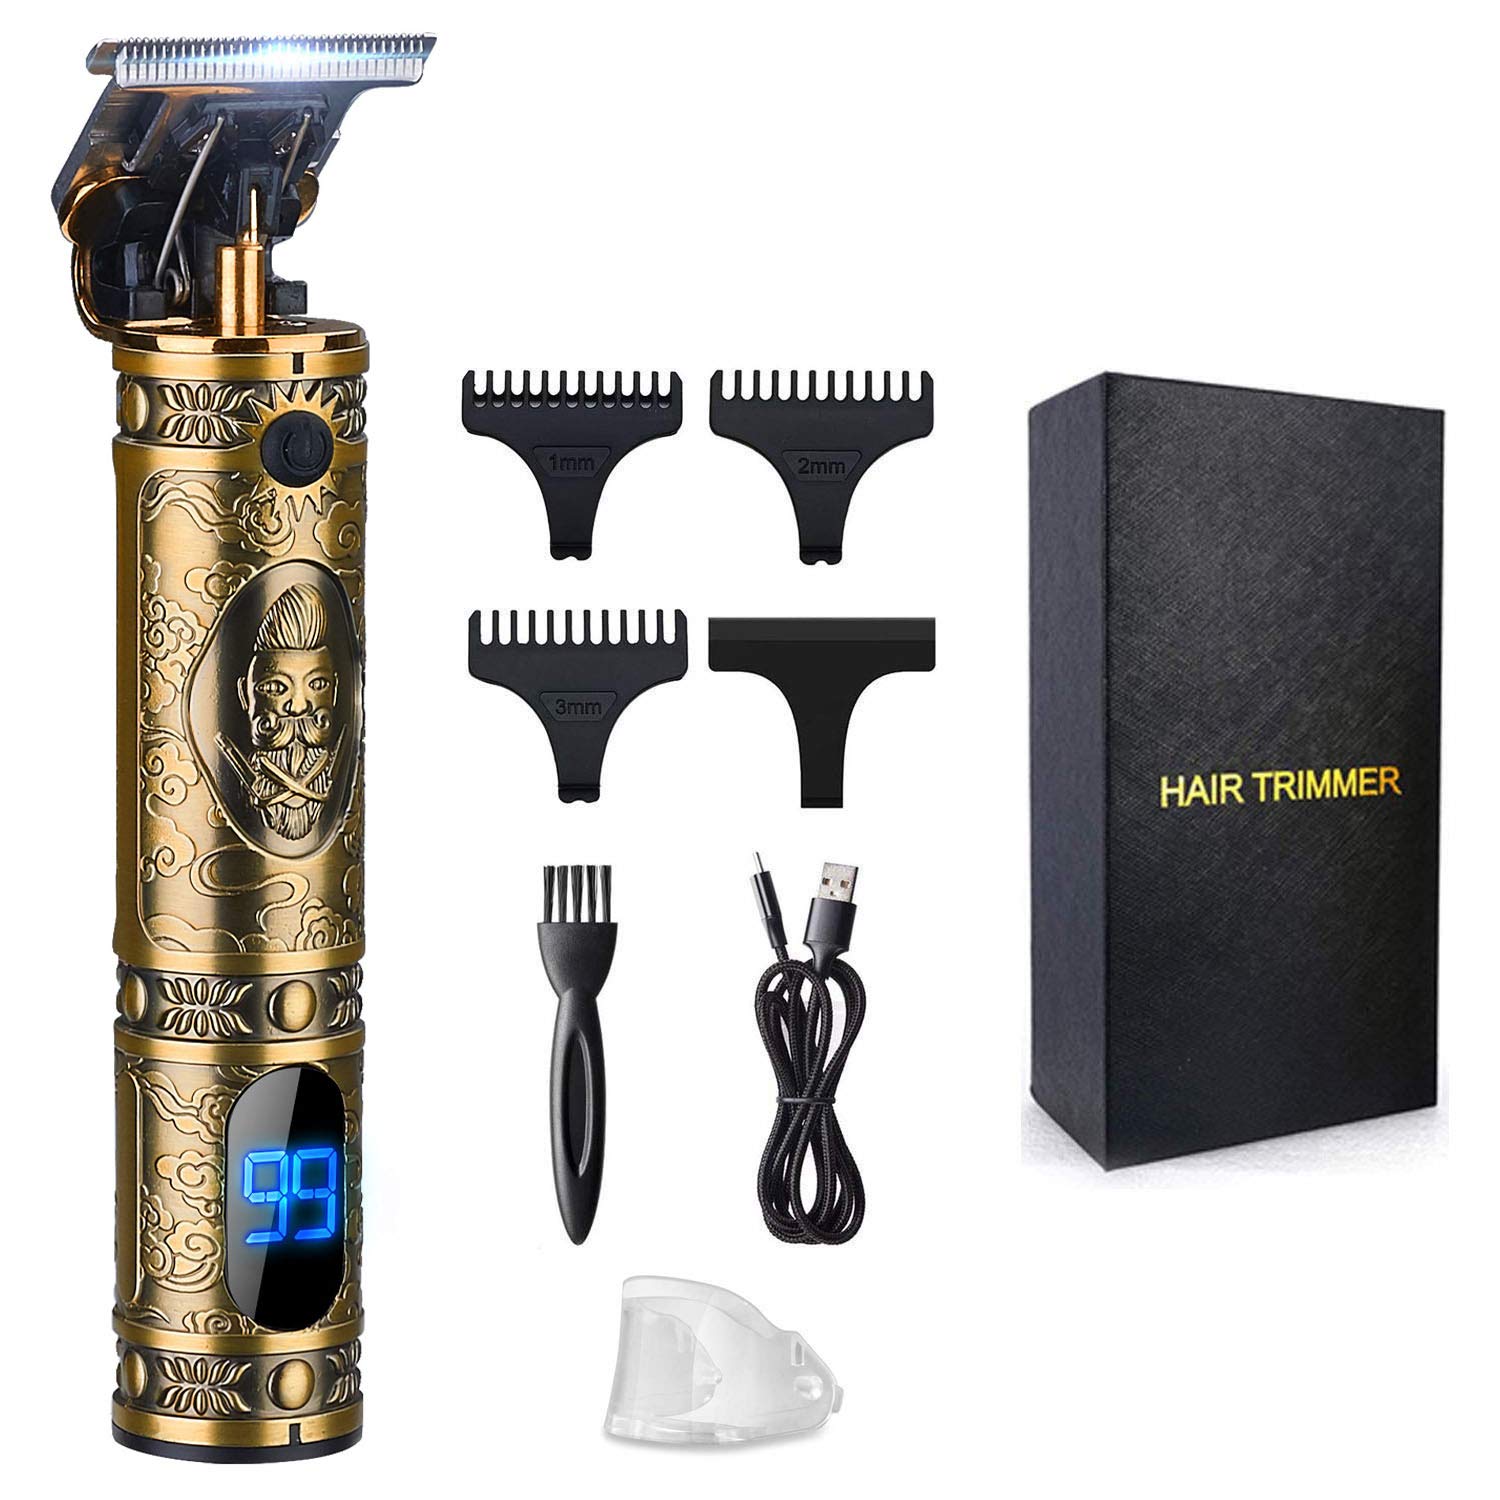 Hair Clippers for Men, Suttik Professional Hair & Beard Trimmer for Barber,  T-Blade Hair Edgers Clippers, Gold Knight Close-Cutting Trimmers, Cordless  Clippers for Hair Cutting, Gift for Men